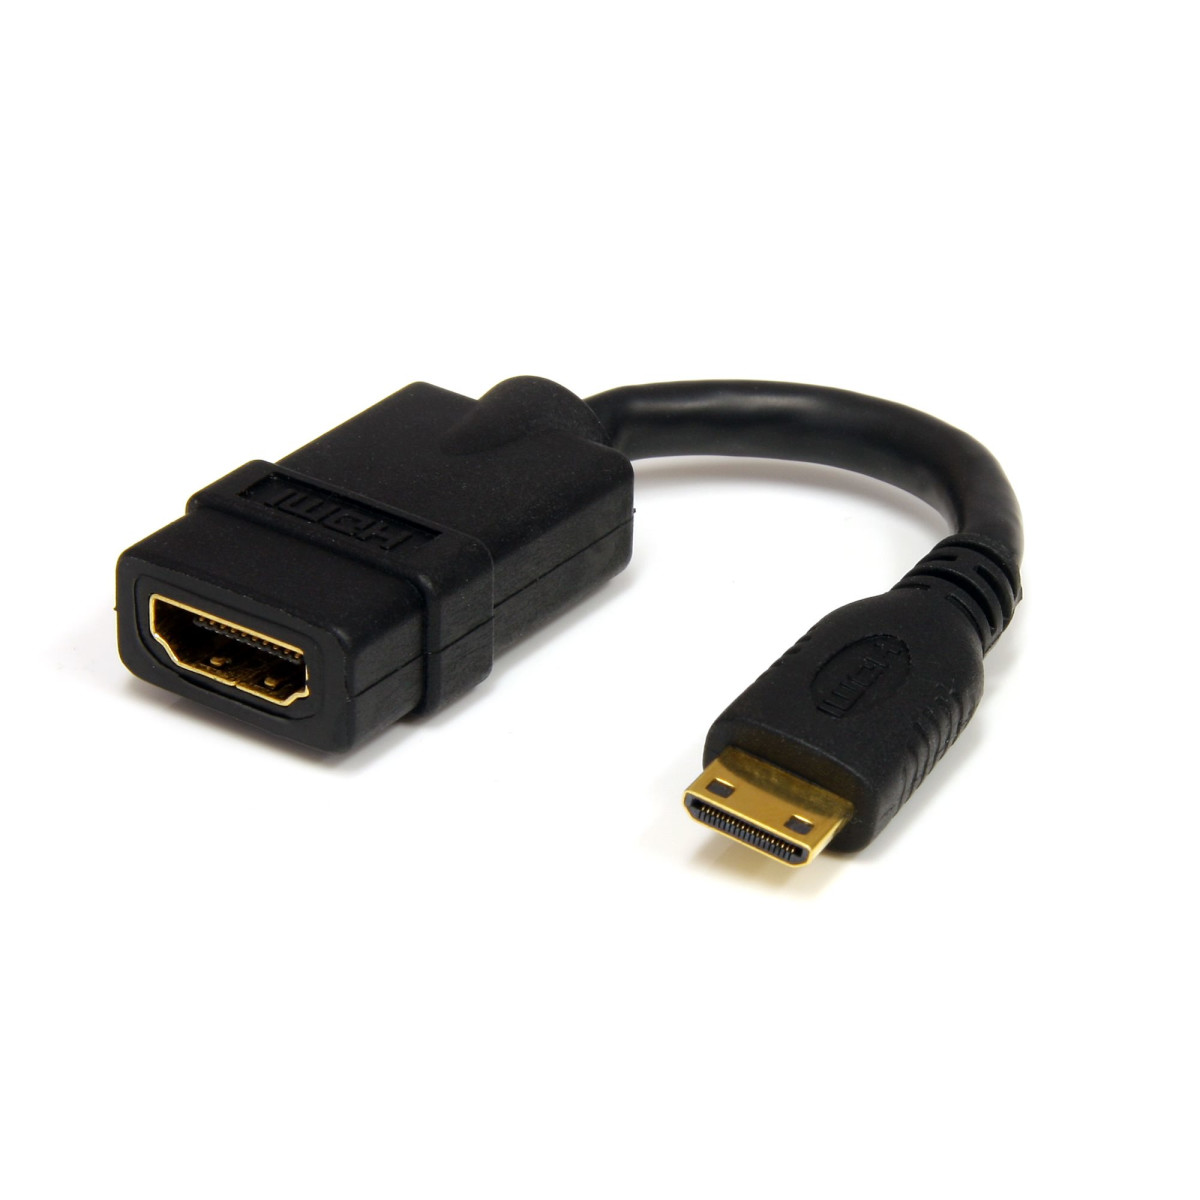 5 High Speed HDMI Cable with Ethernet